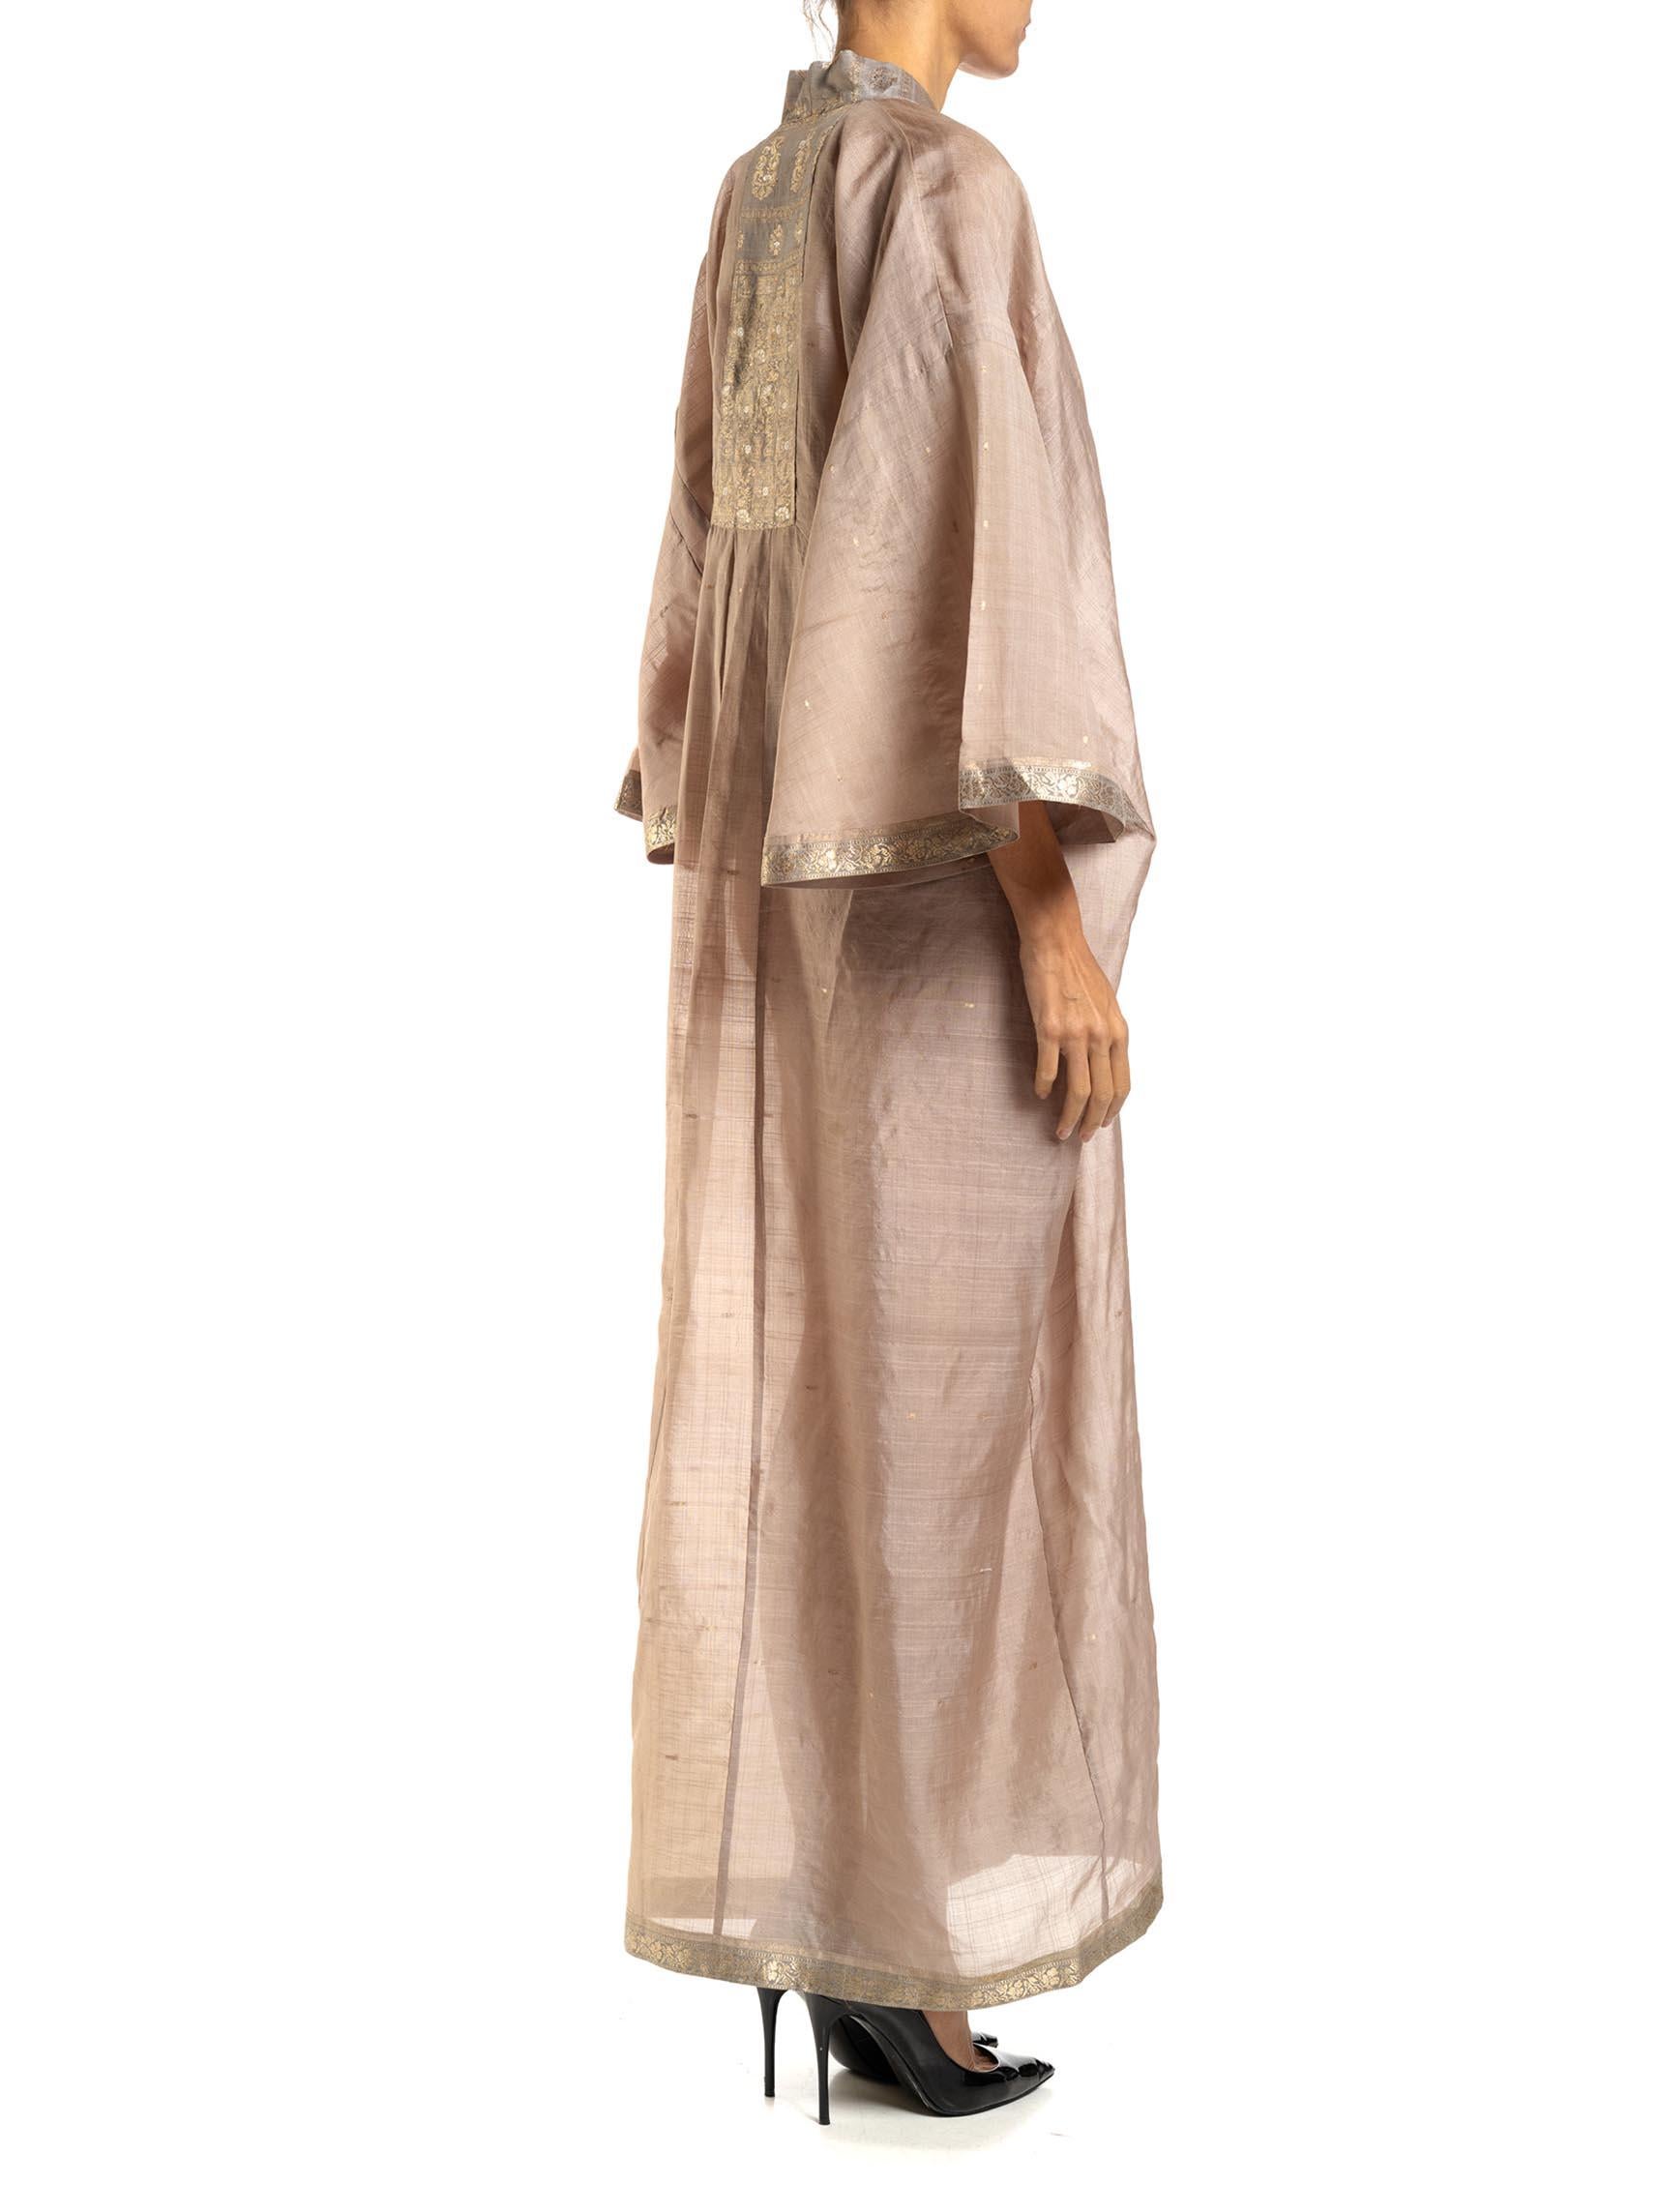 MORPHEW COLLECTION Dusty Pink Silk Kaftan Made From Vintage Sari For Sale 4